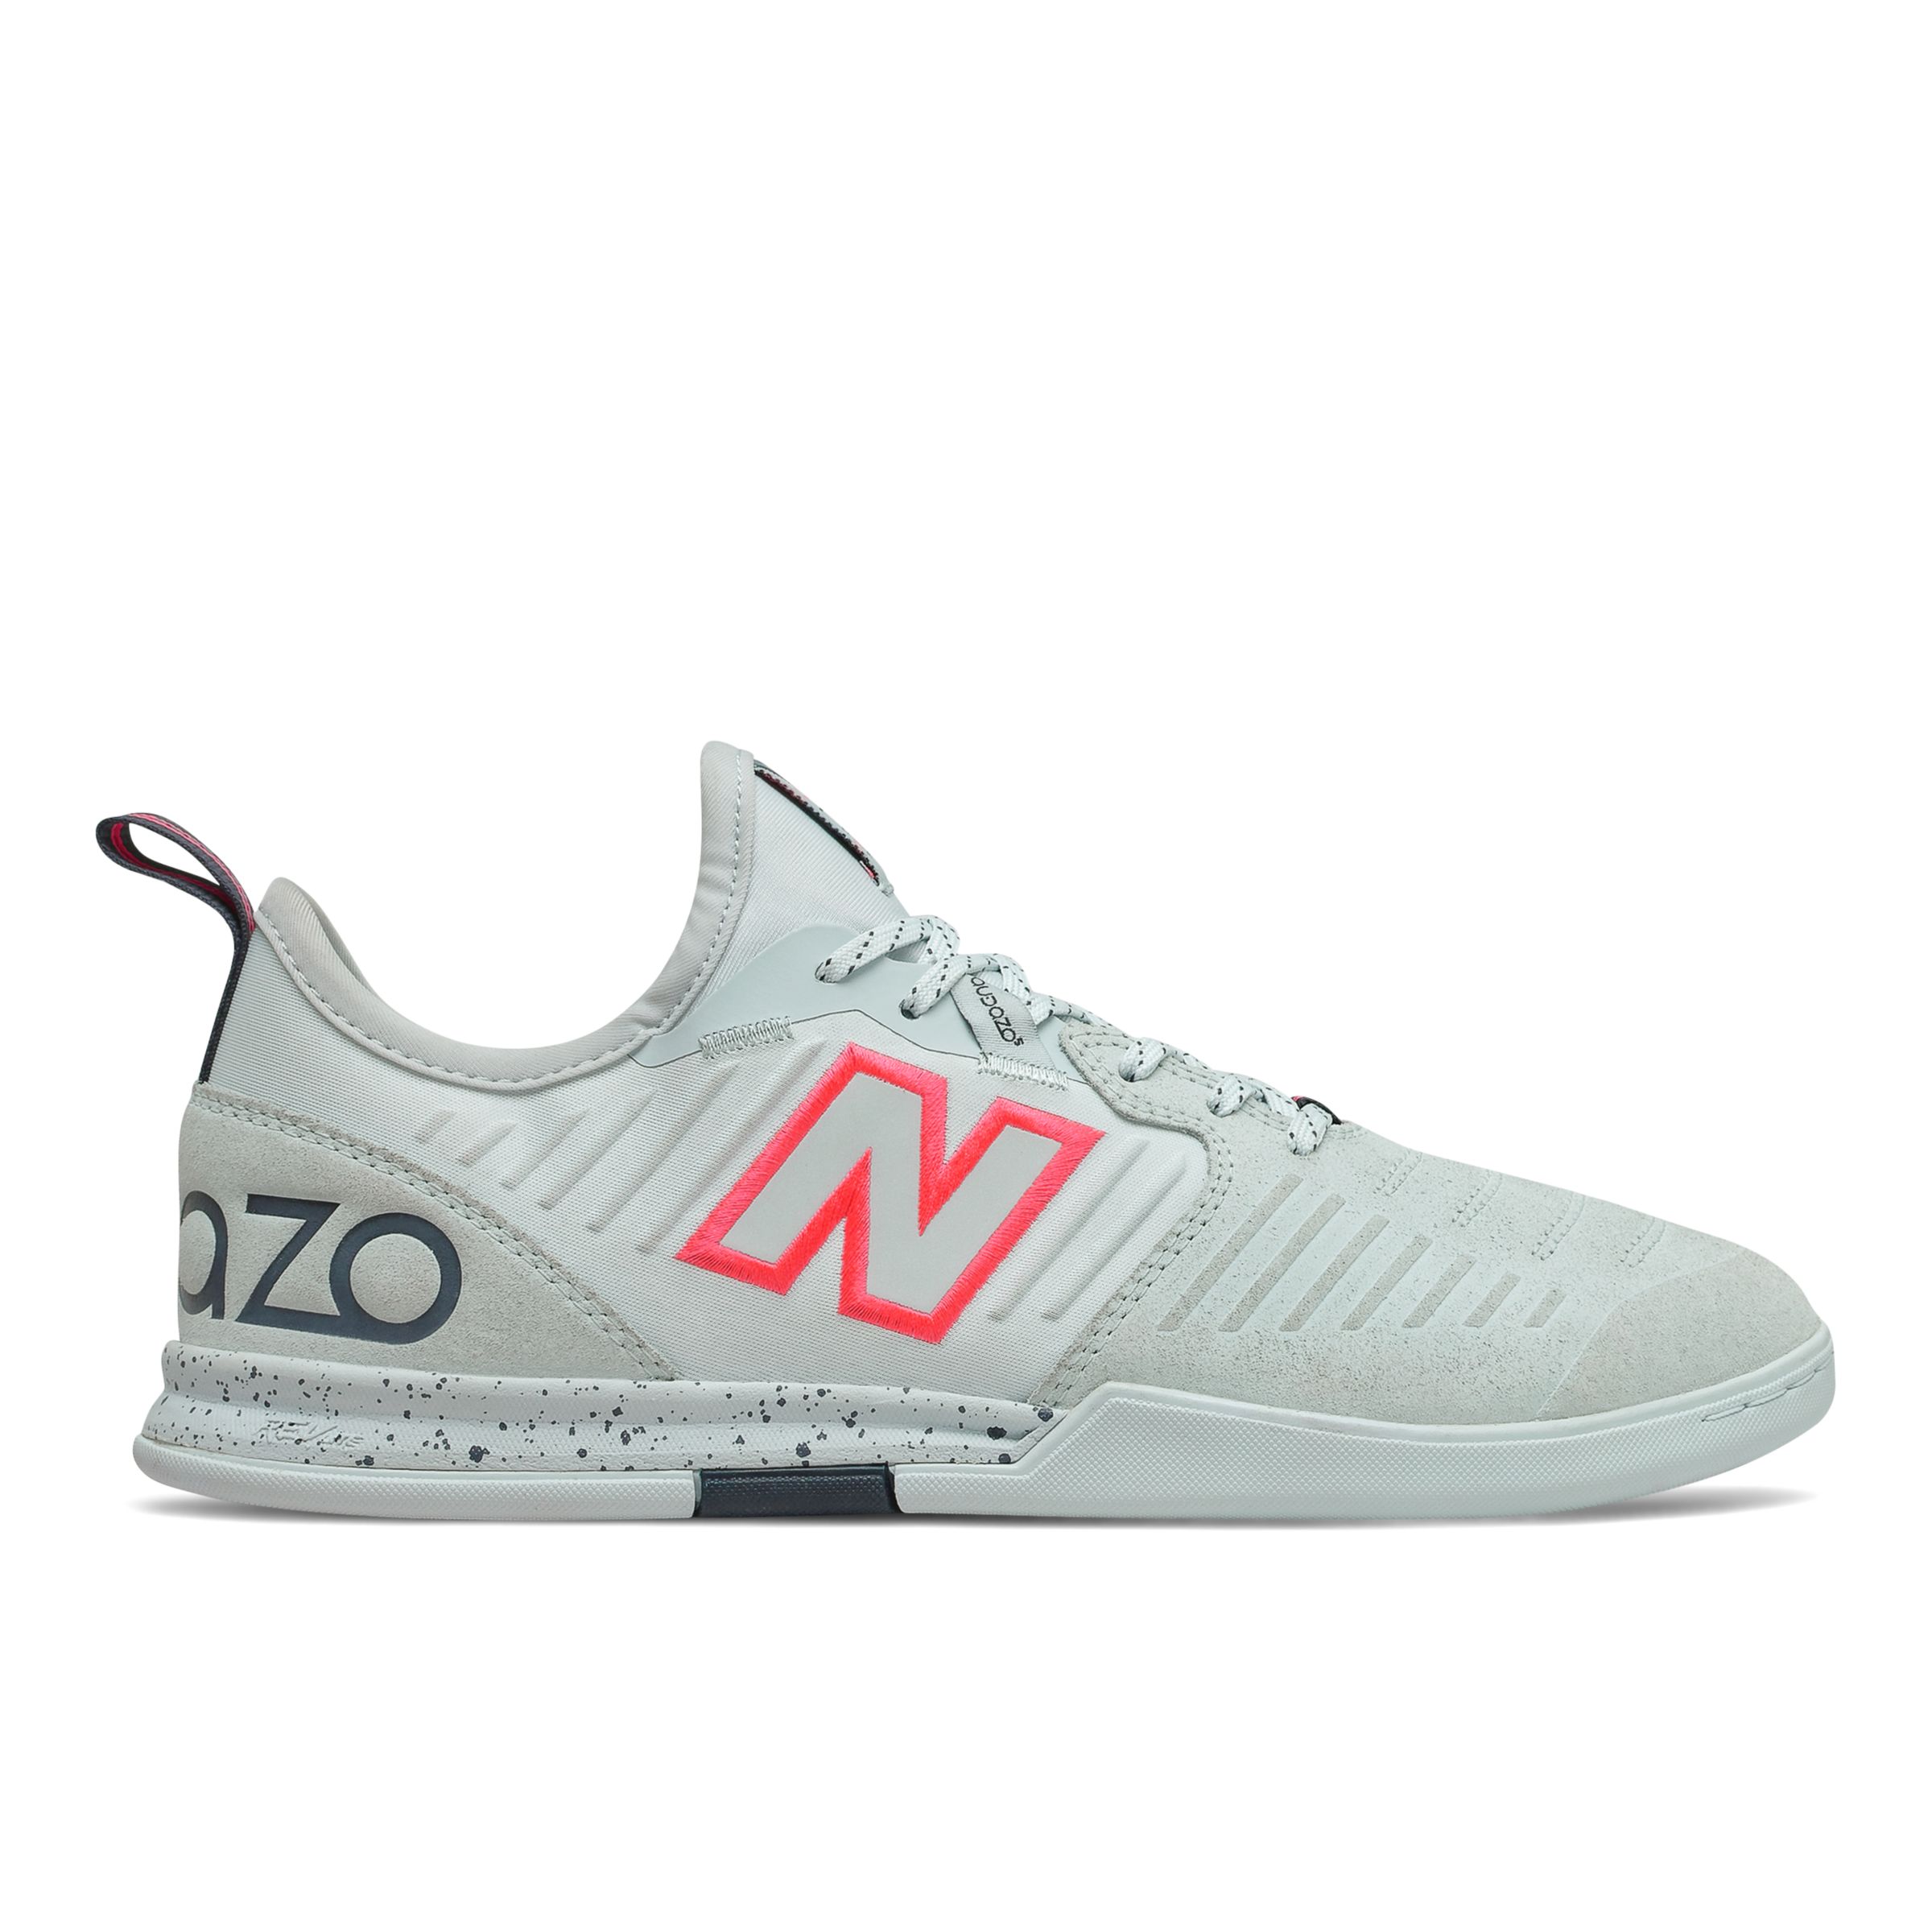 Audazo V5 Pro Suede IN - New Balance